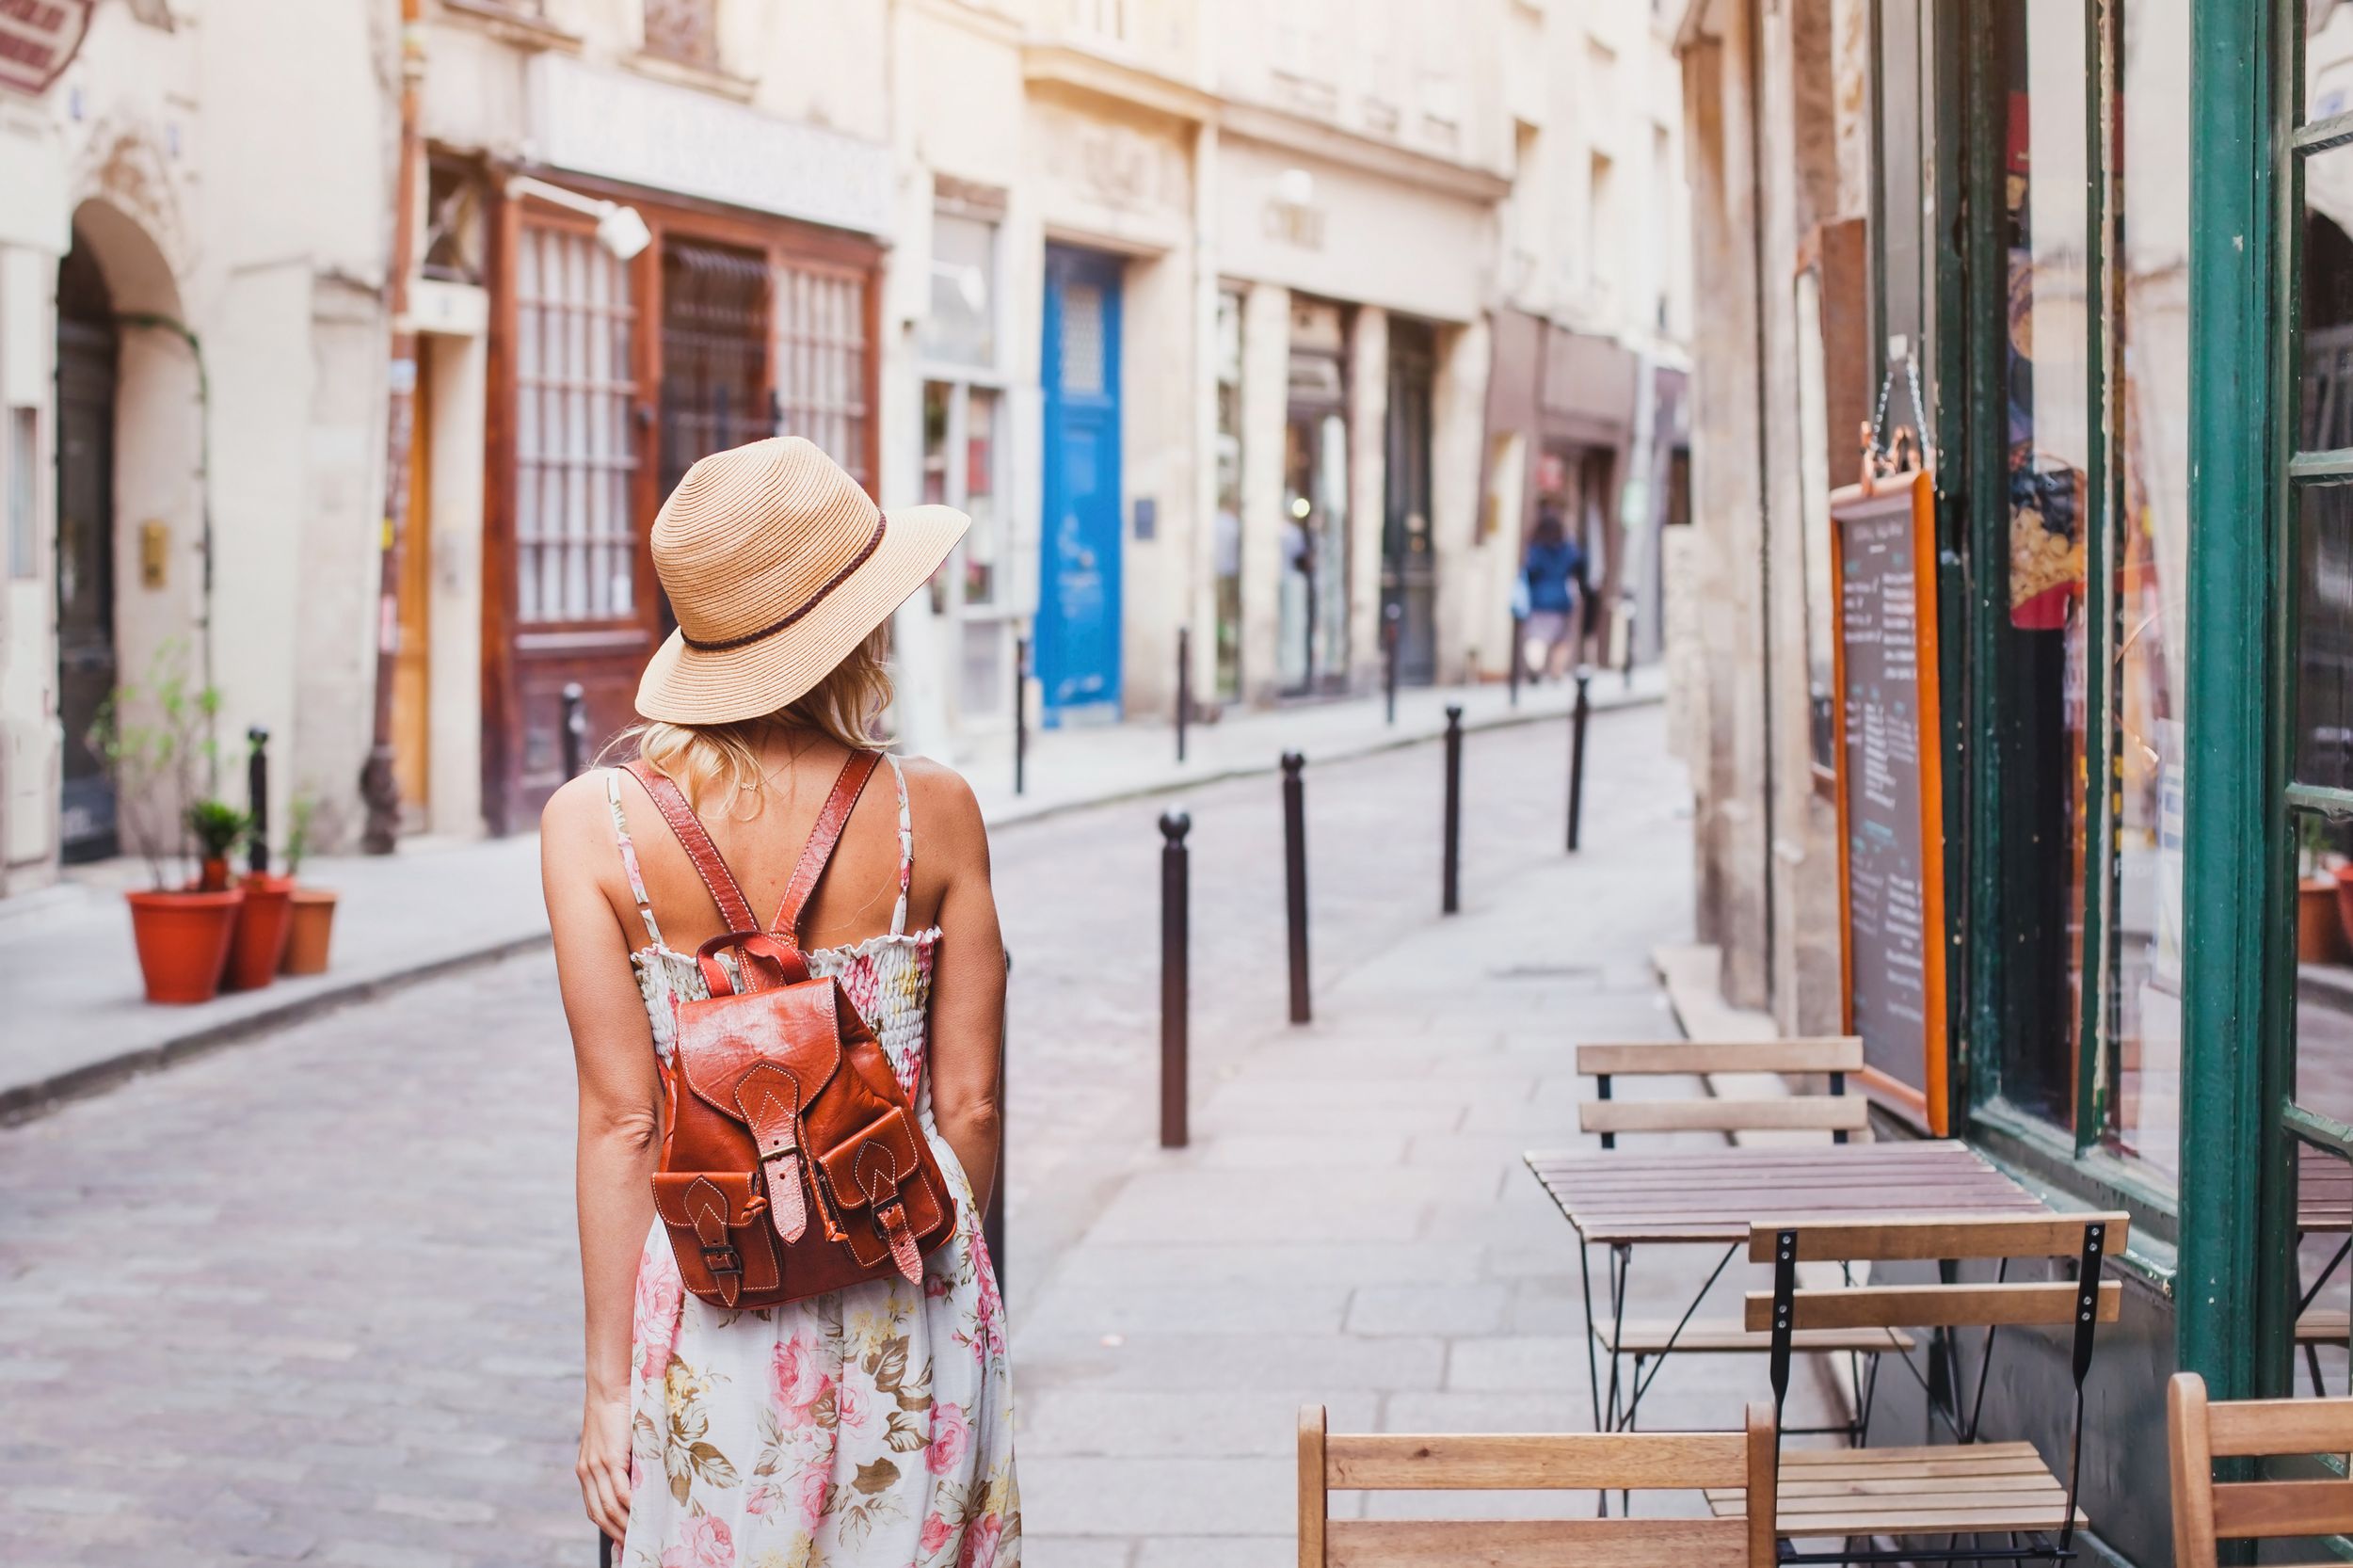 Woman walking down street next to shop with tables outside